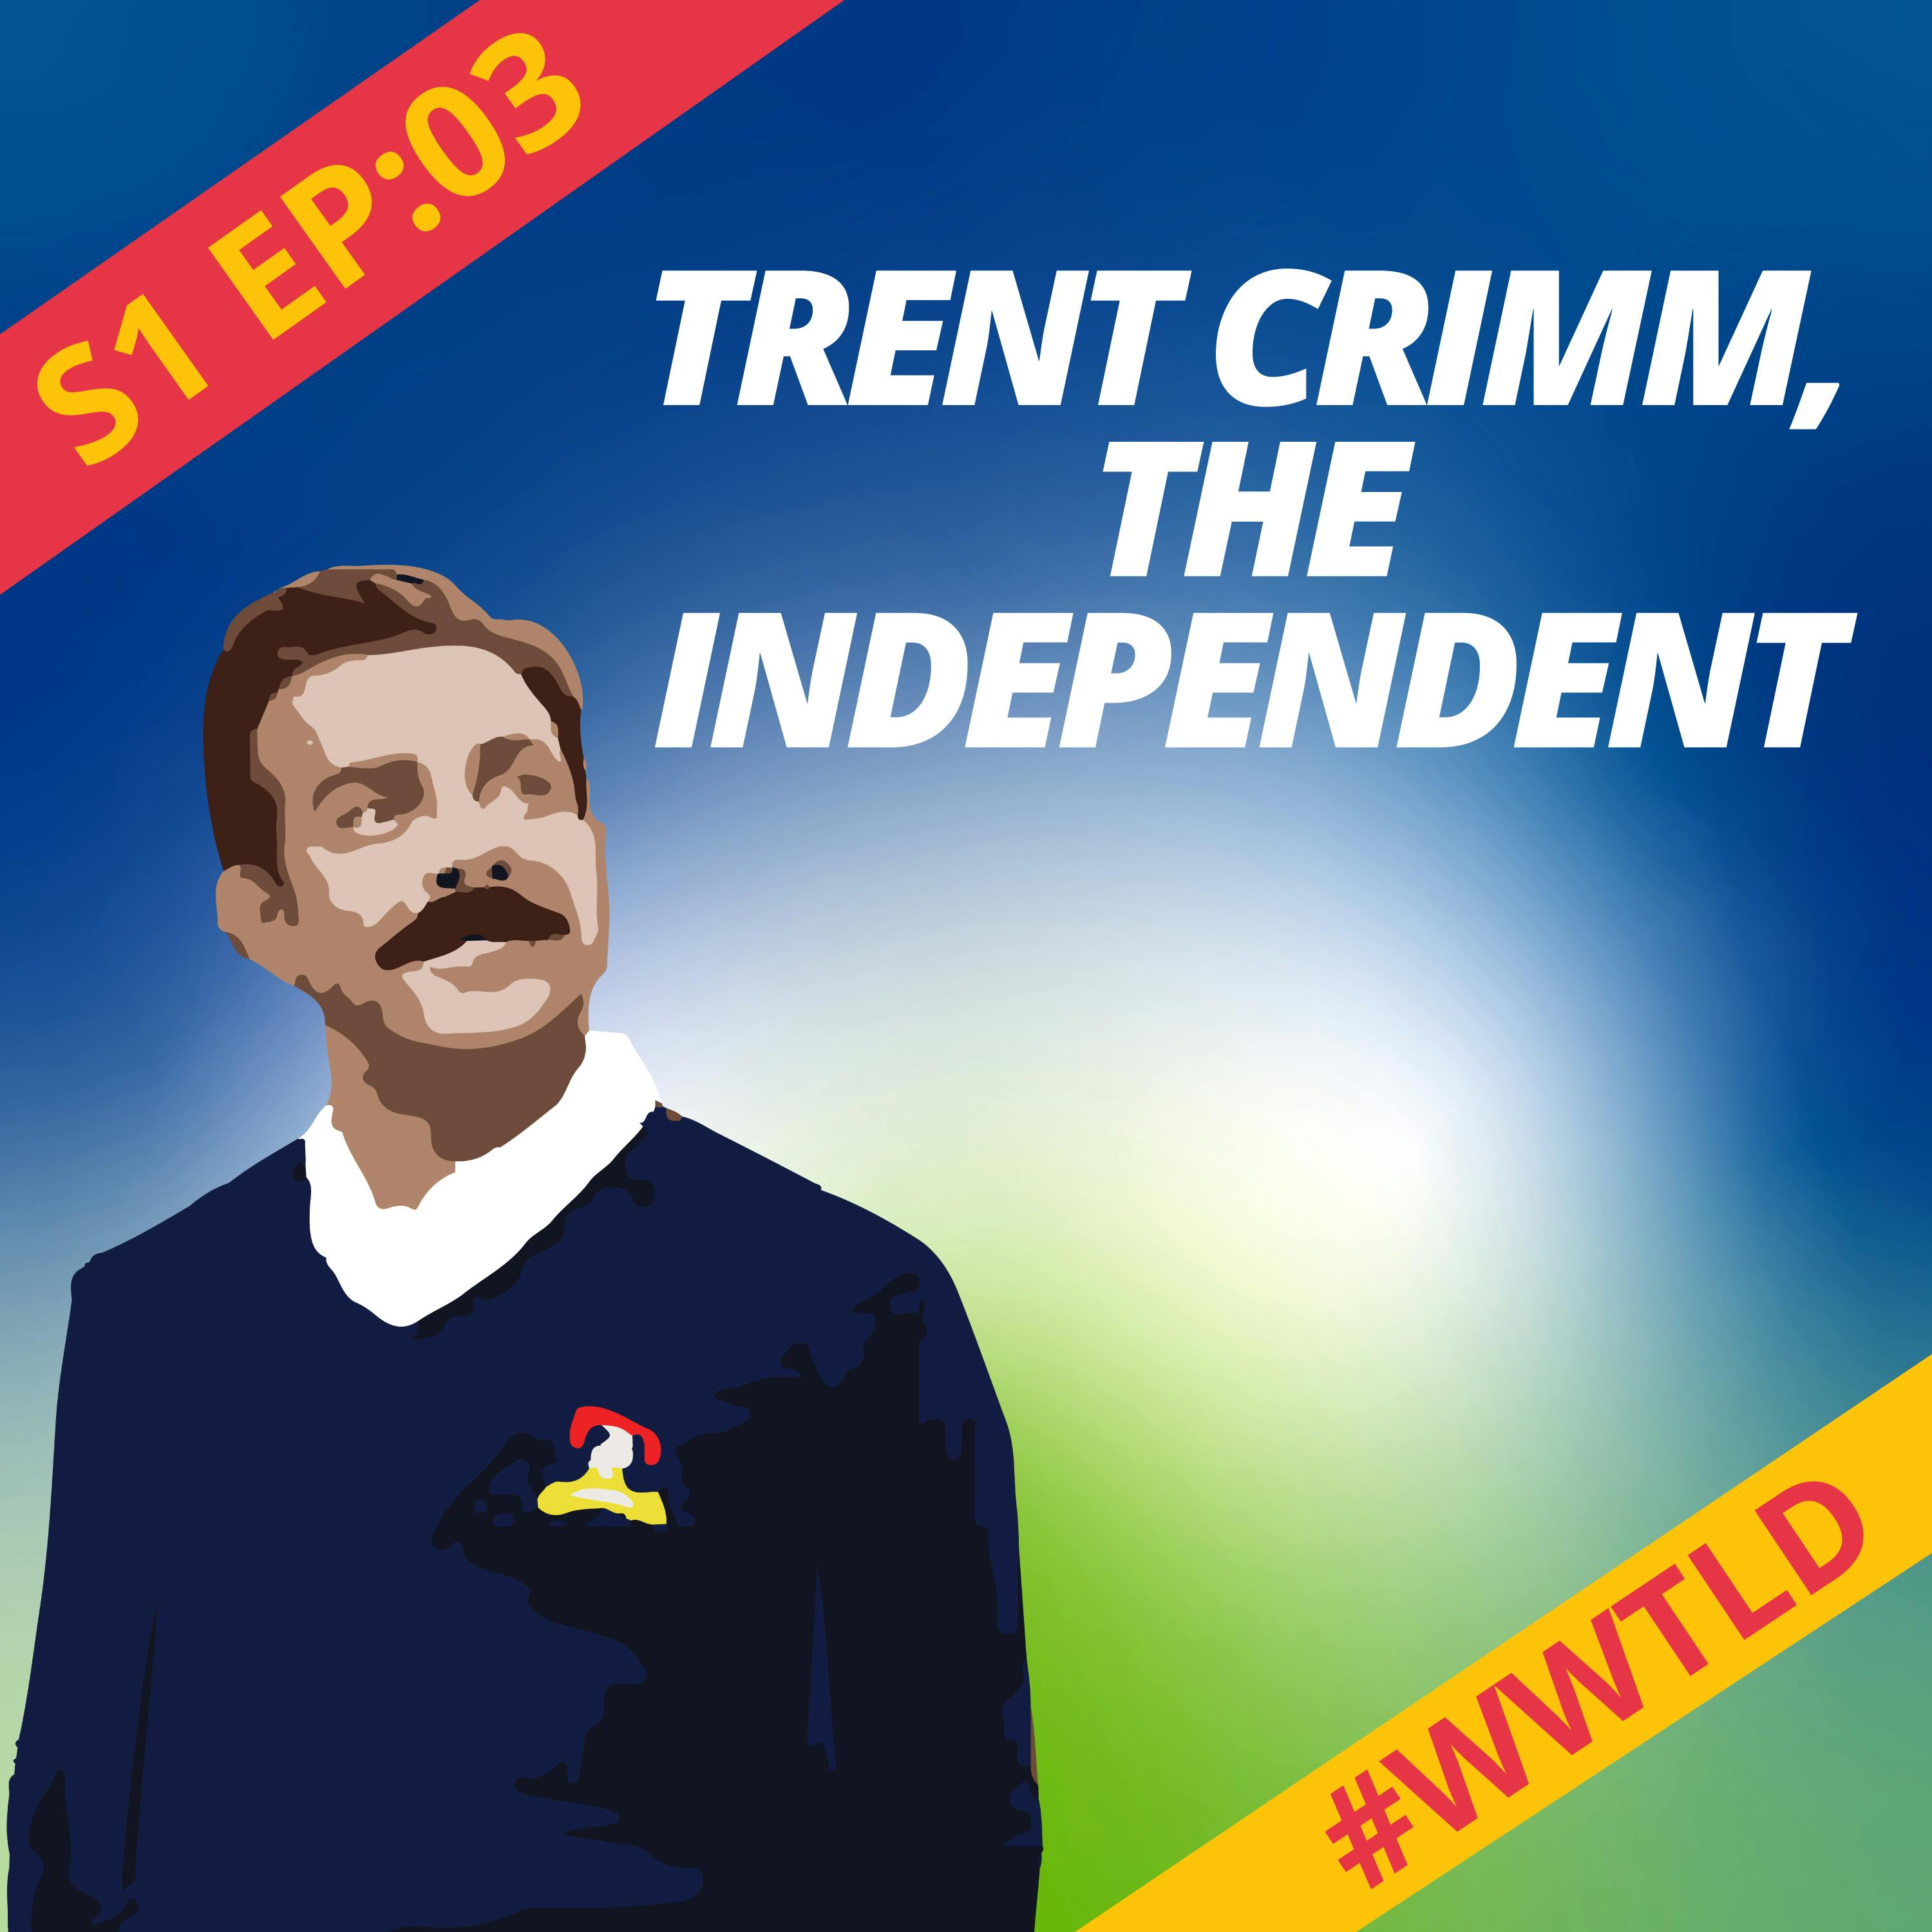 Trent Crimm, The Independent Image